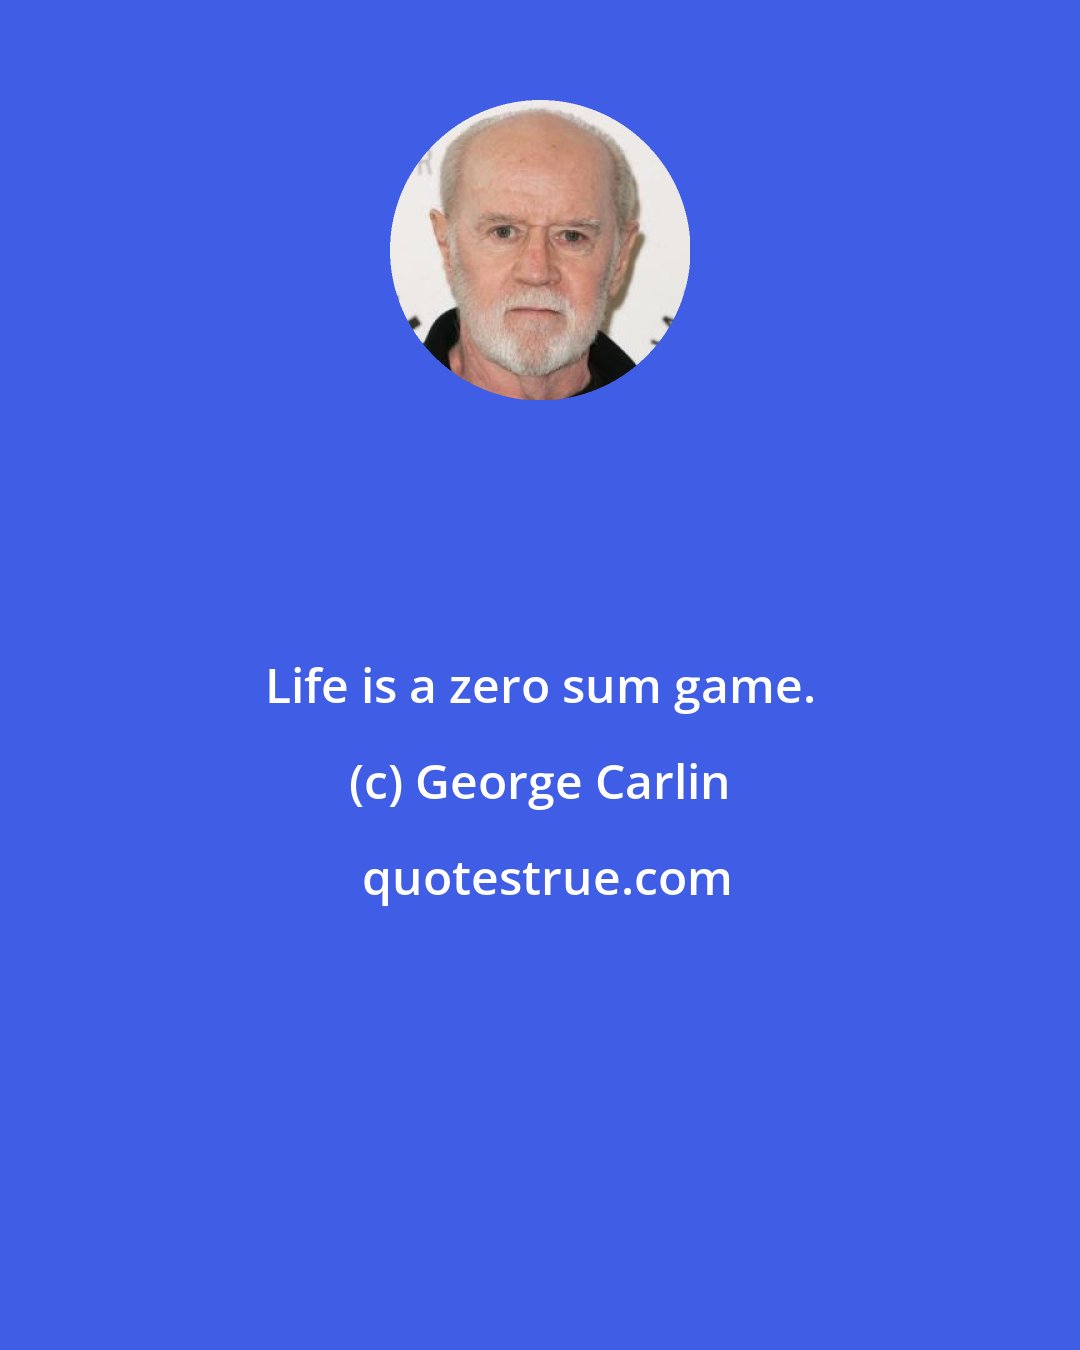 George Carlin: Life is a zero sum game.